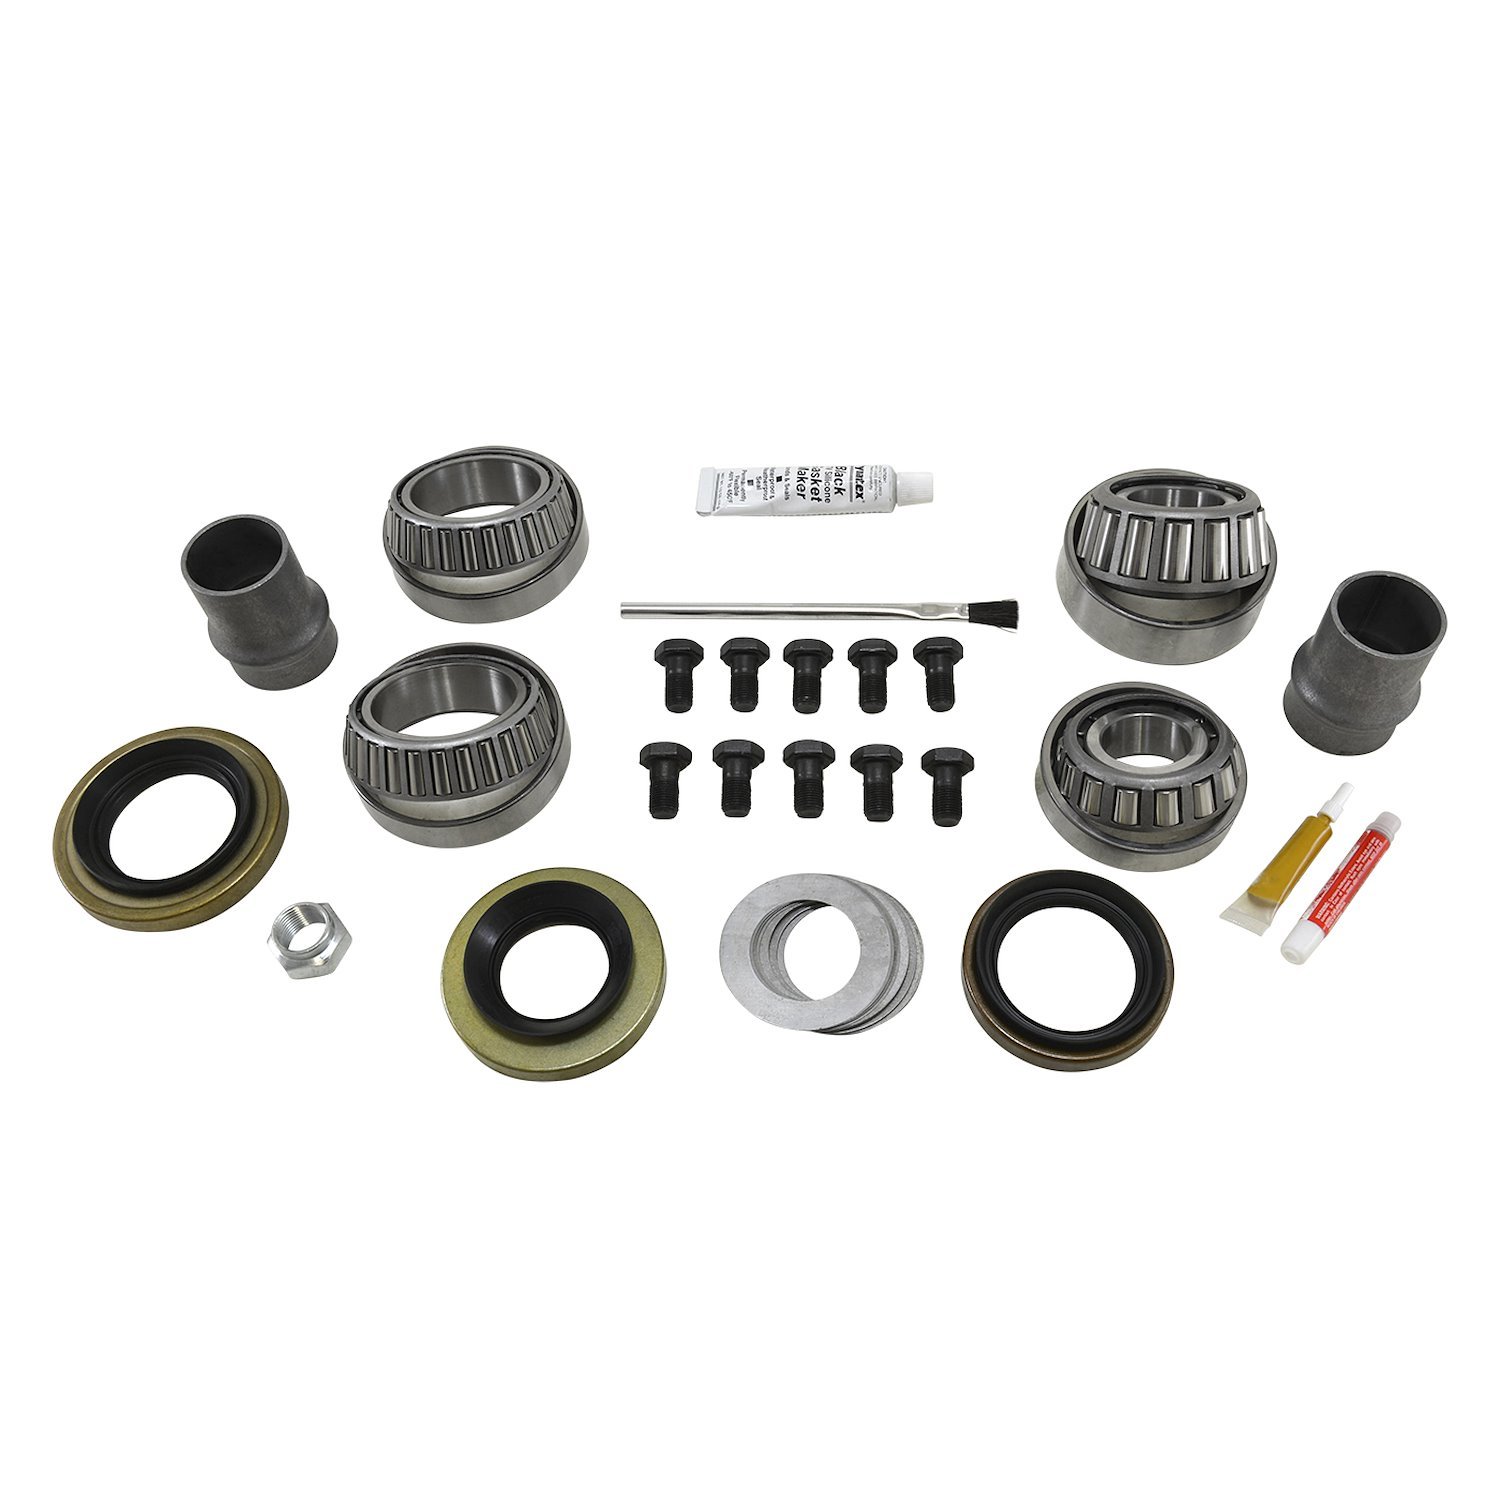 Master Overhaul Kit For Toyota 7.5 in. Ifs Diff, T100/Tacoma/Tundra